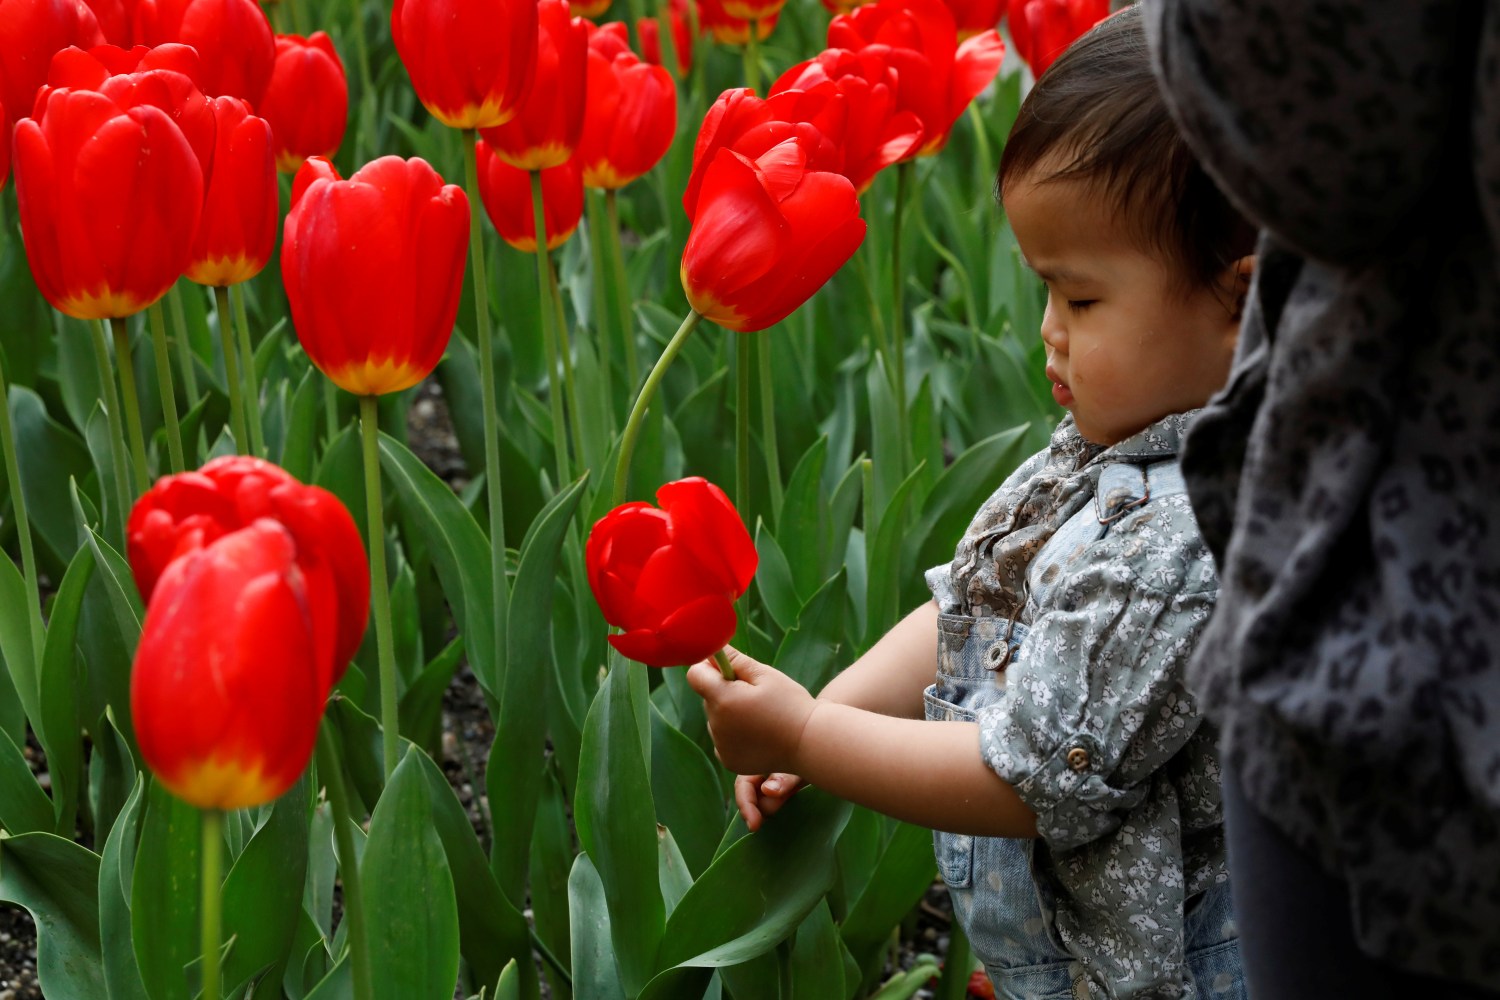 A child holds a tulip in New York